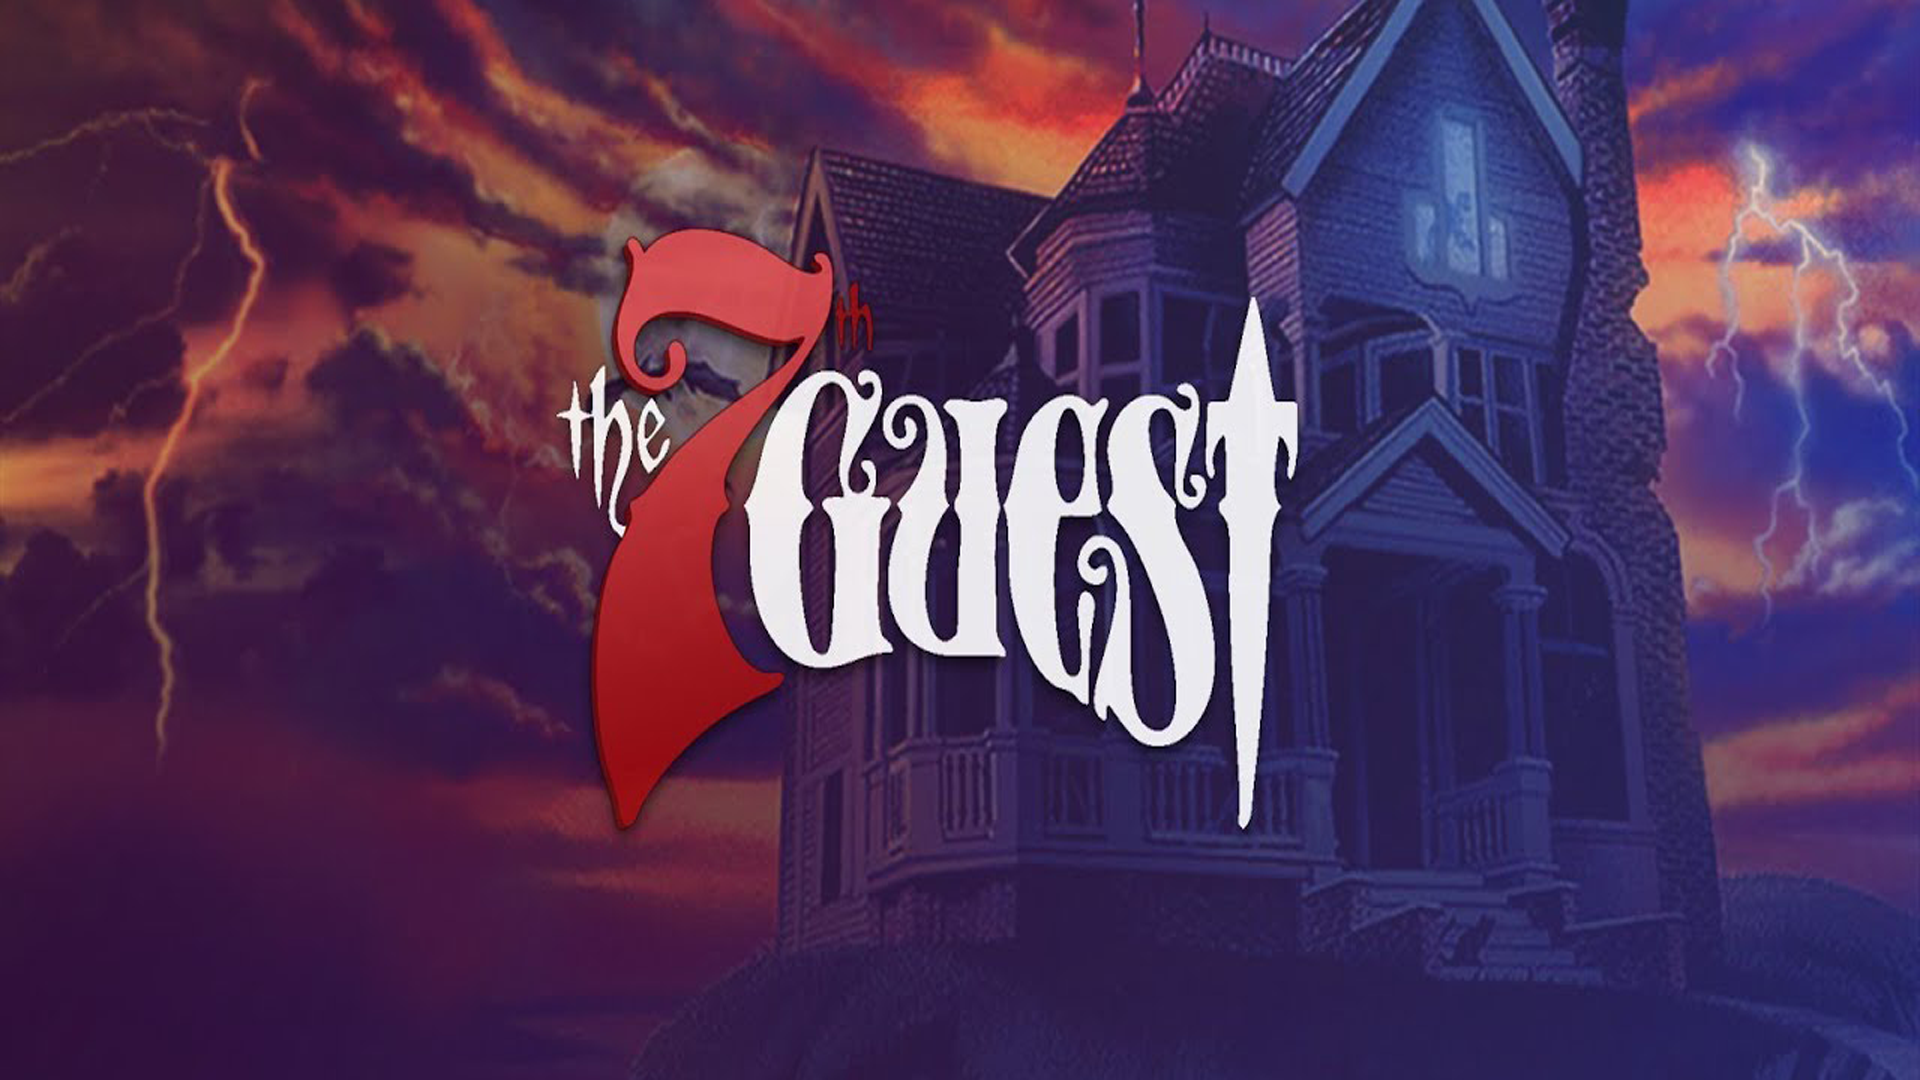 Let’s Play The 7th Guest